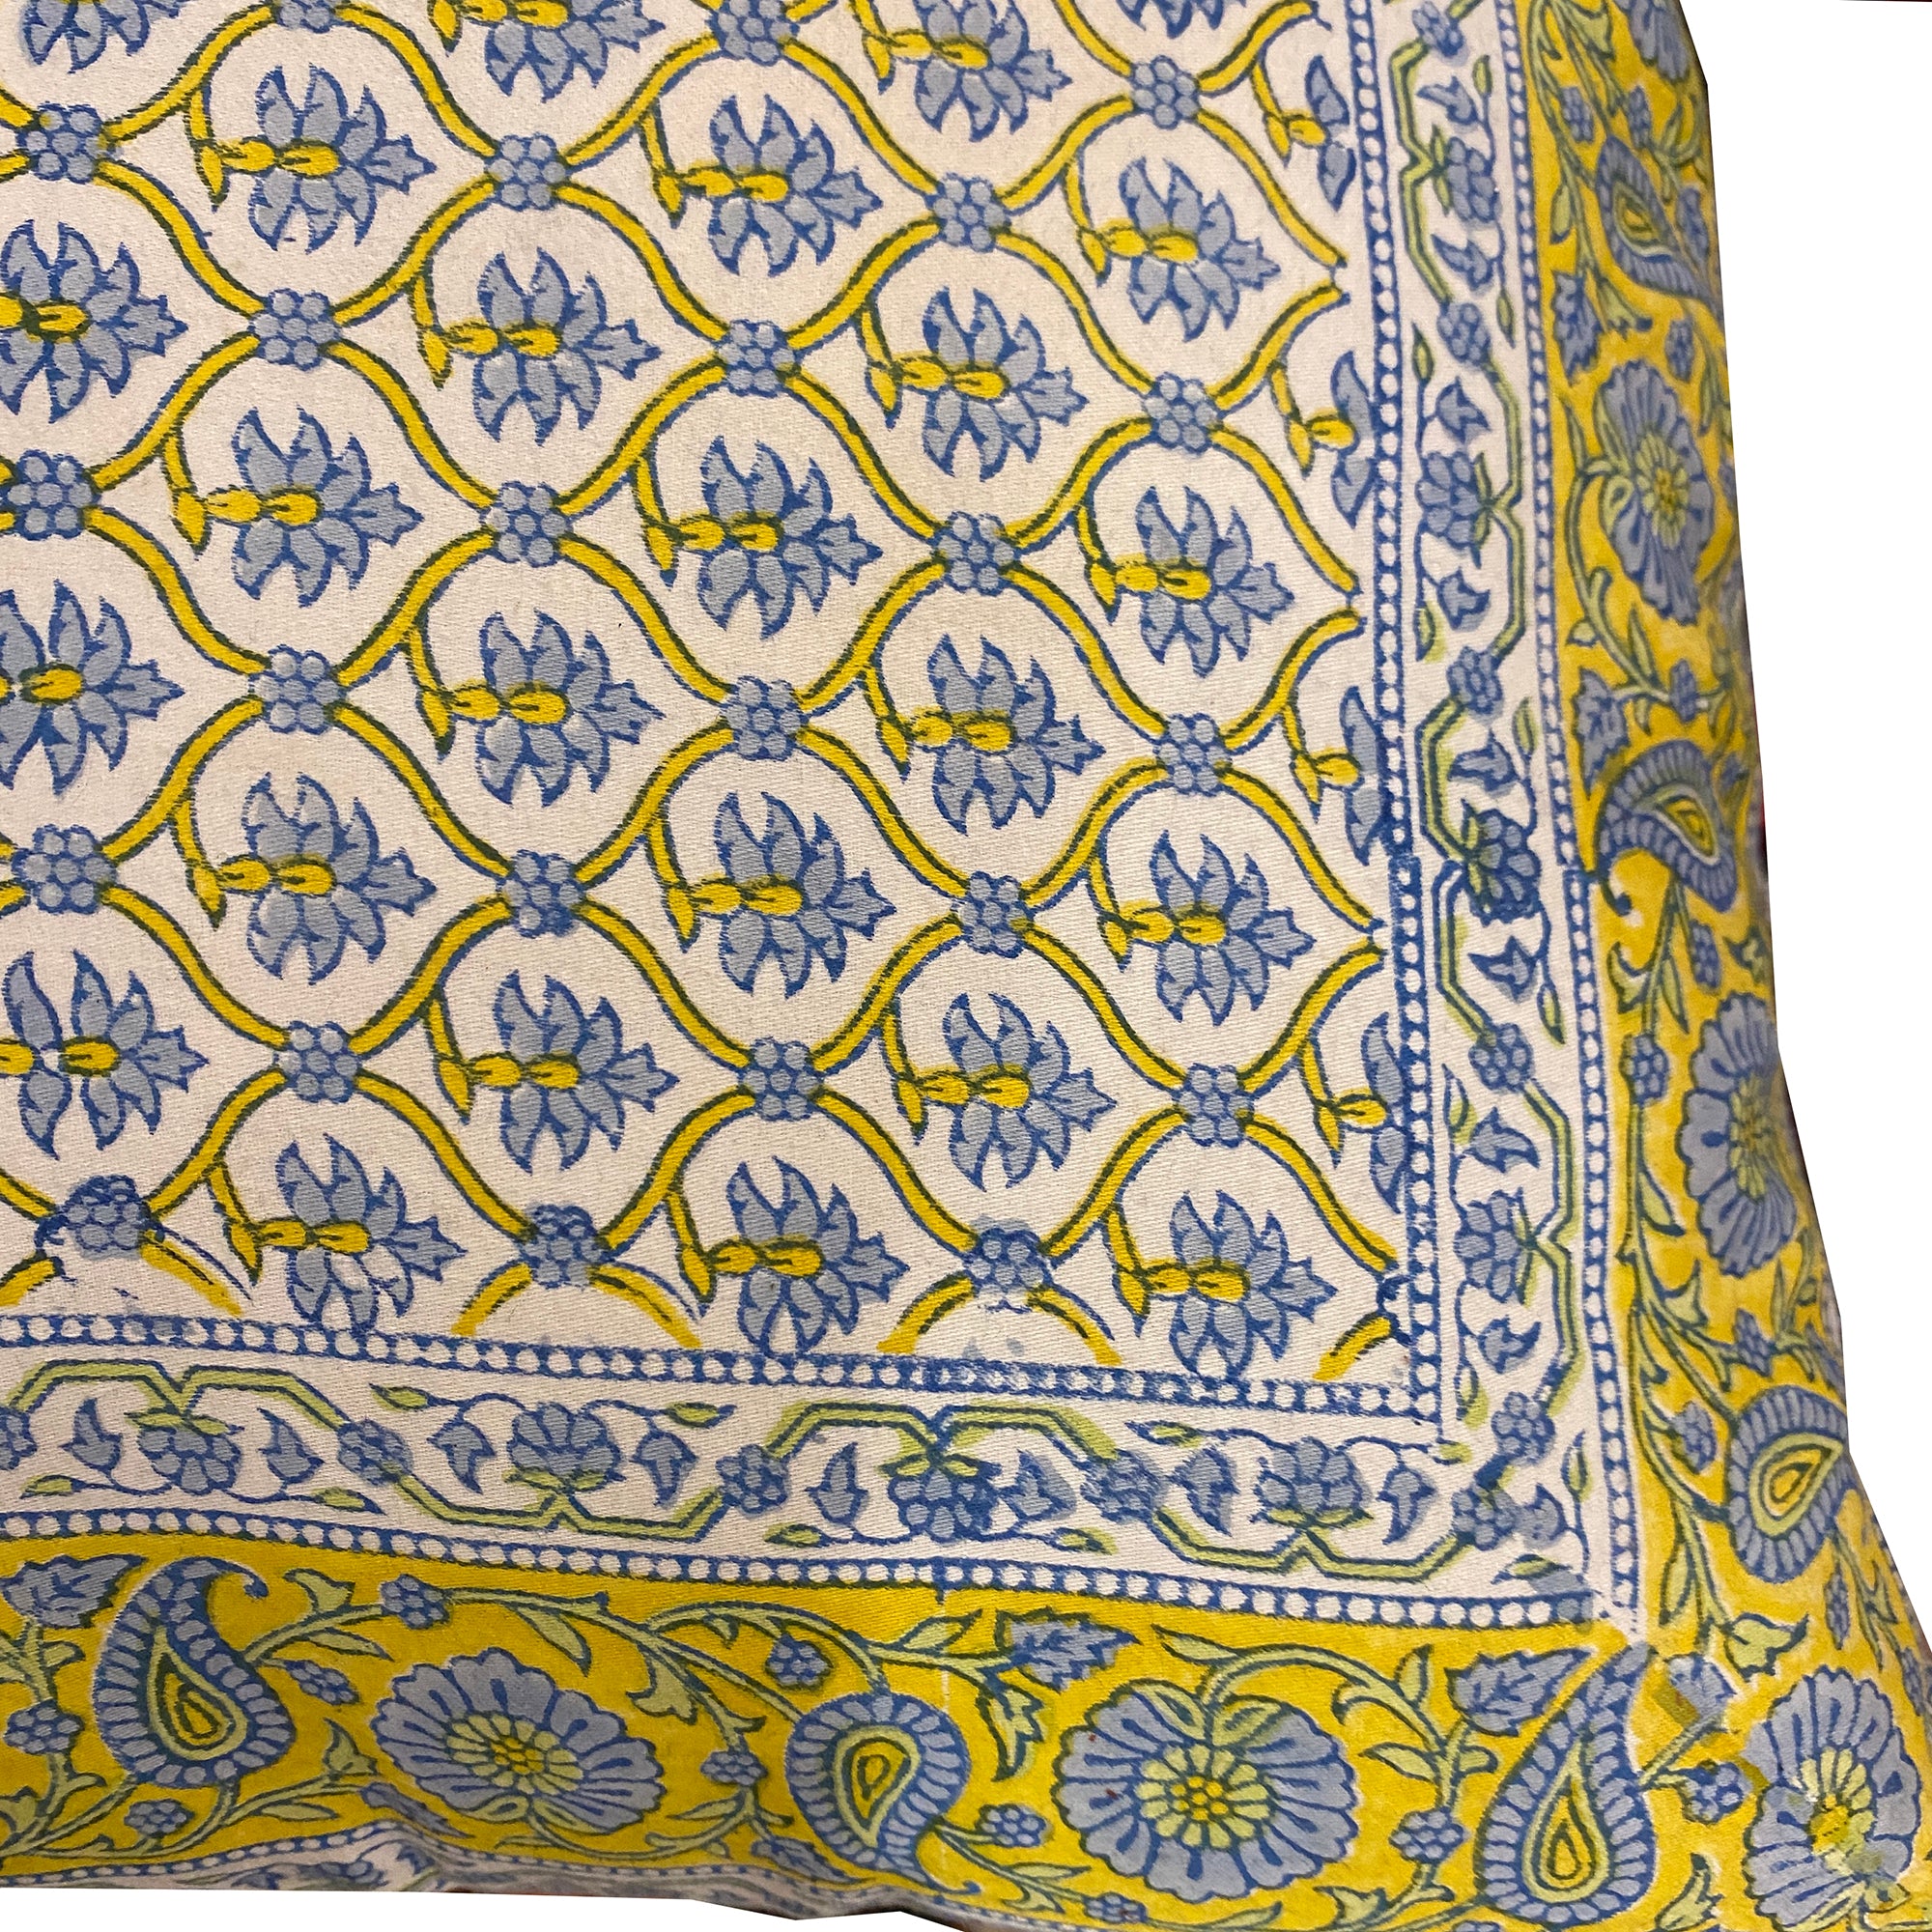 Provencal Block Print Pillow Cover 24x24 - Vintage India NYC